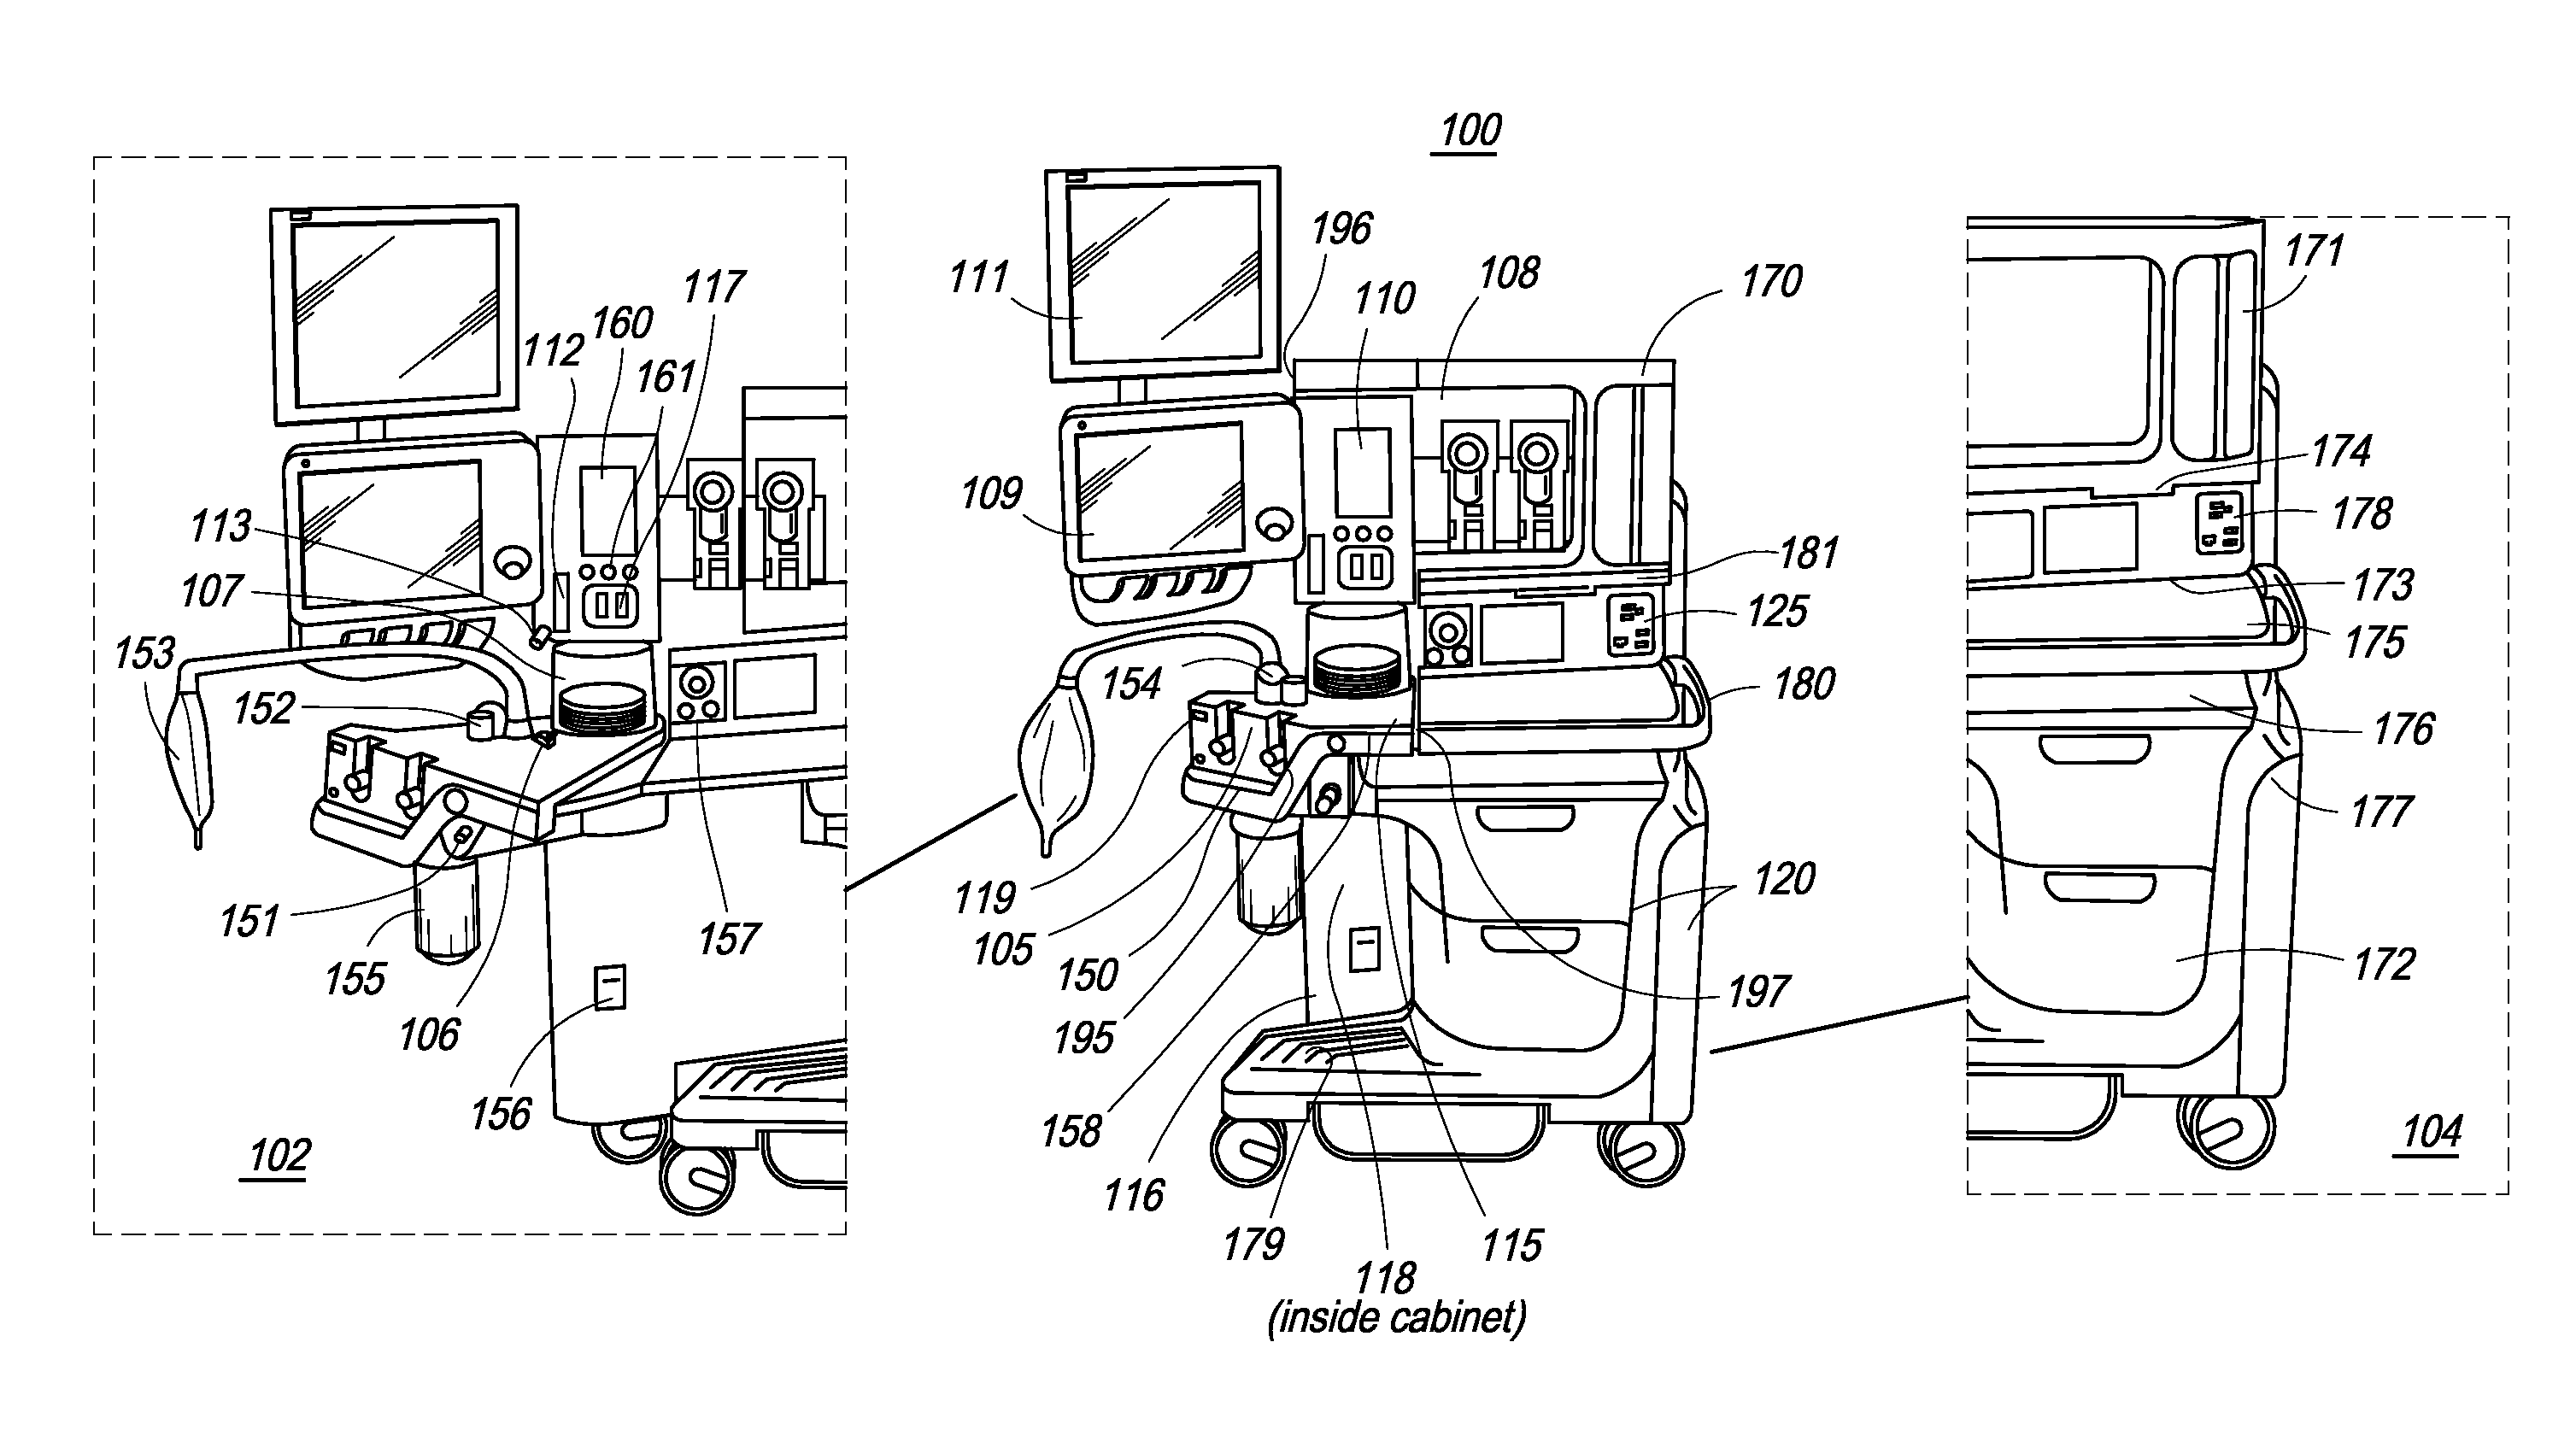 Integrated, Extendable Anesthesia System